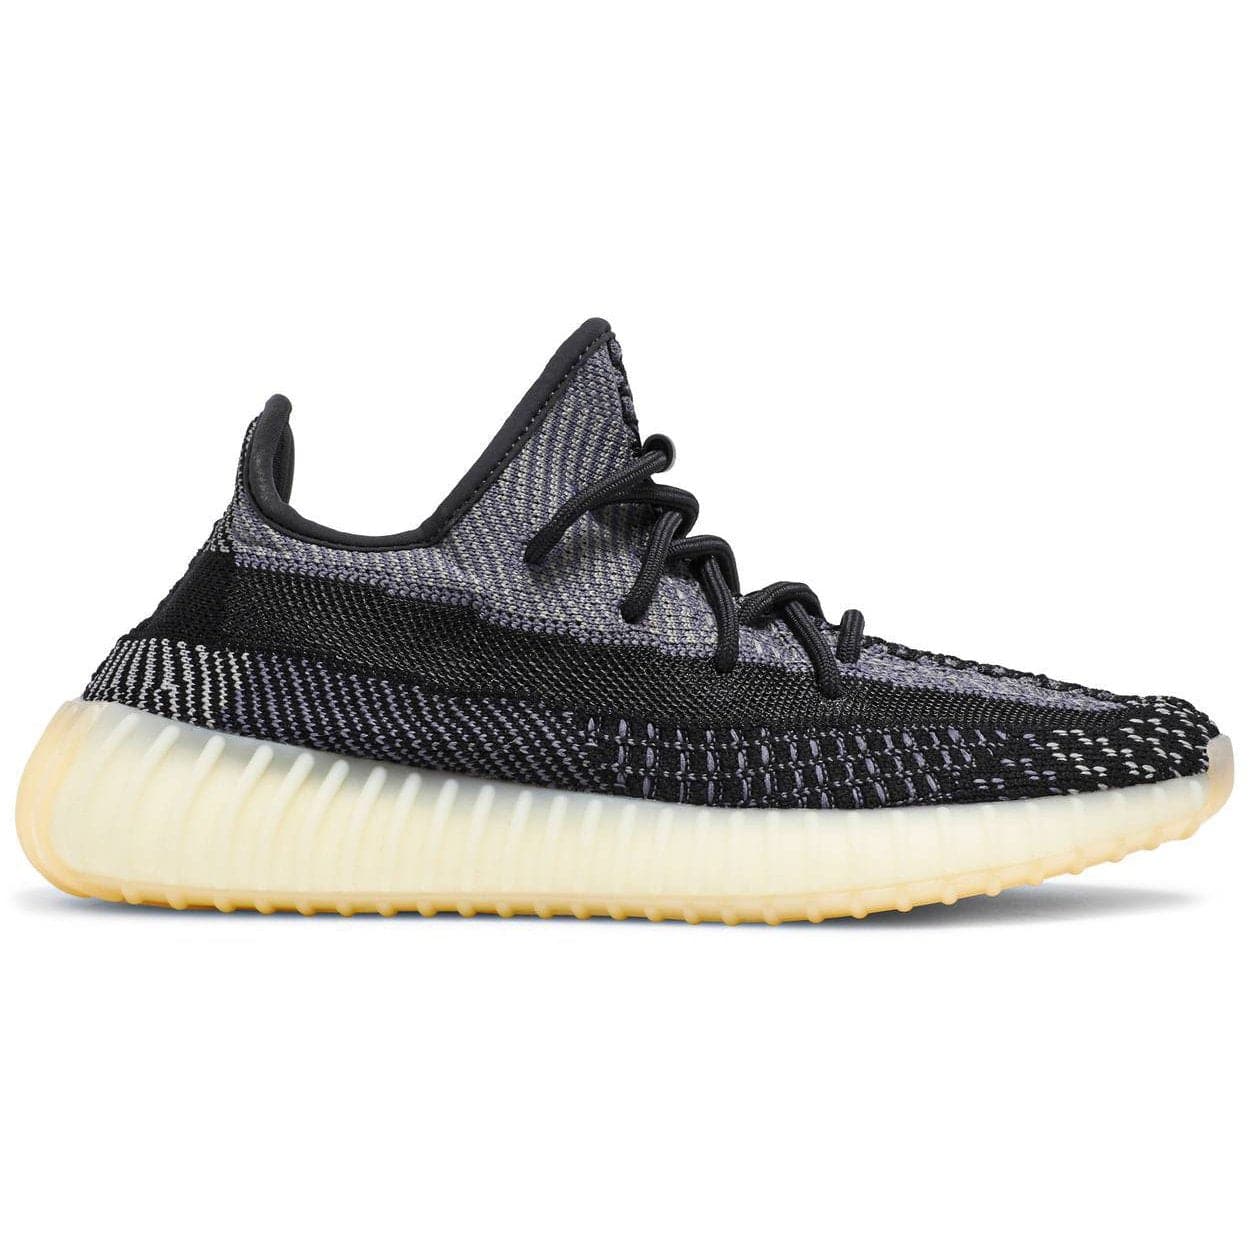 yeezys on afterpay